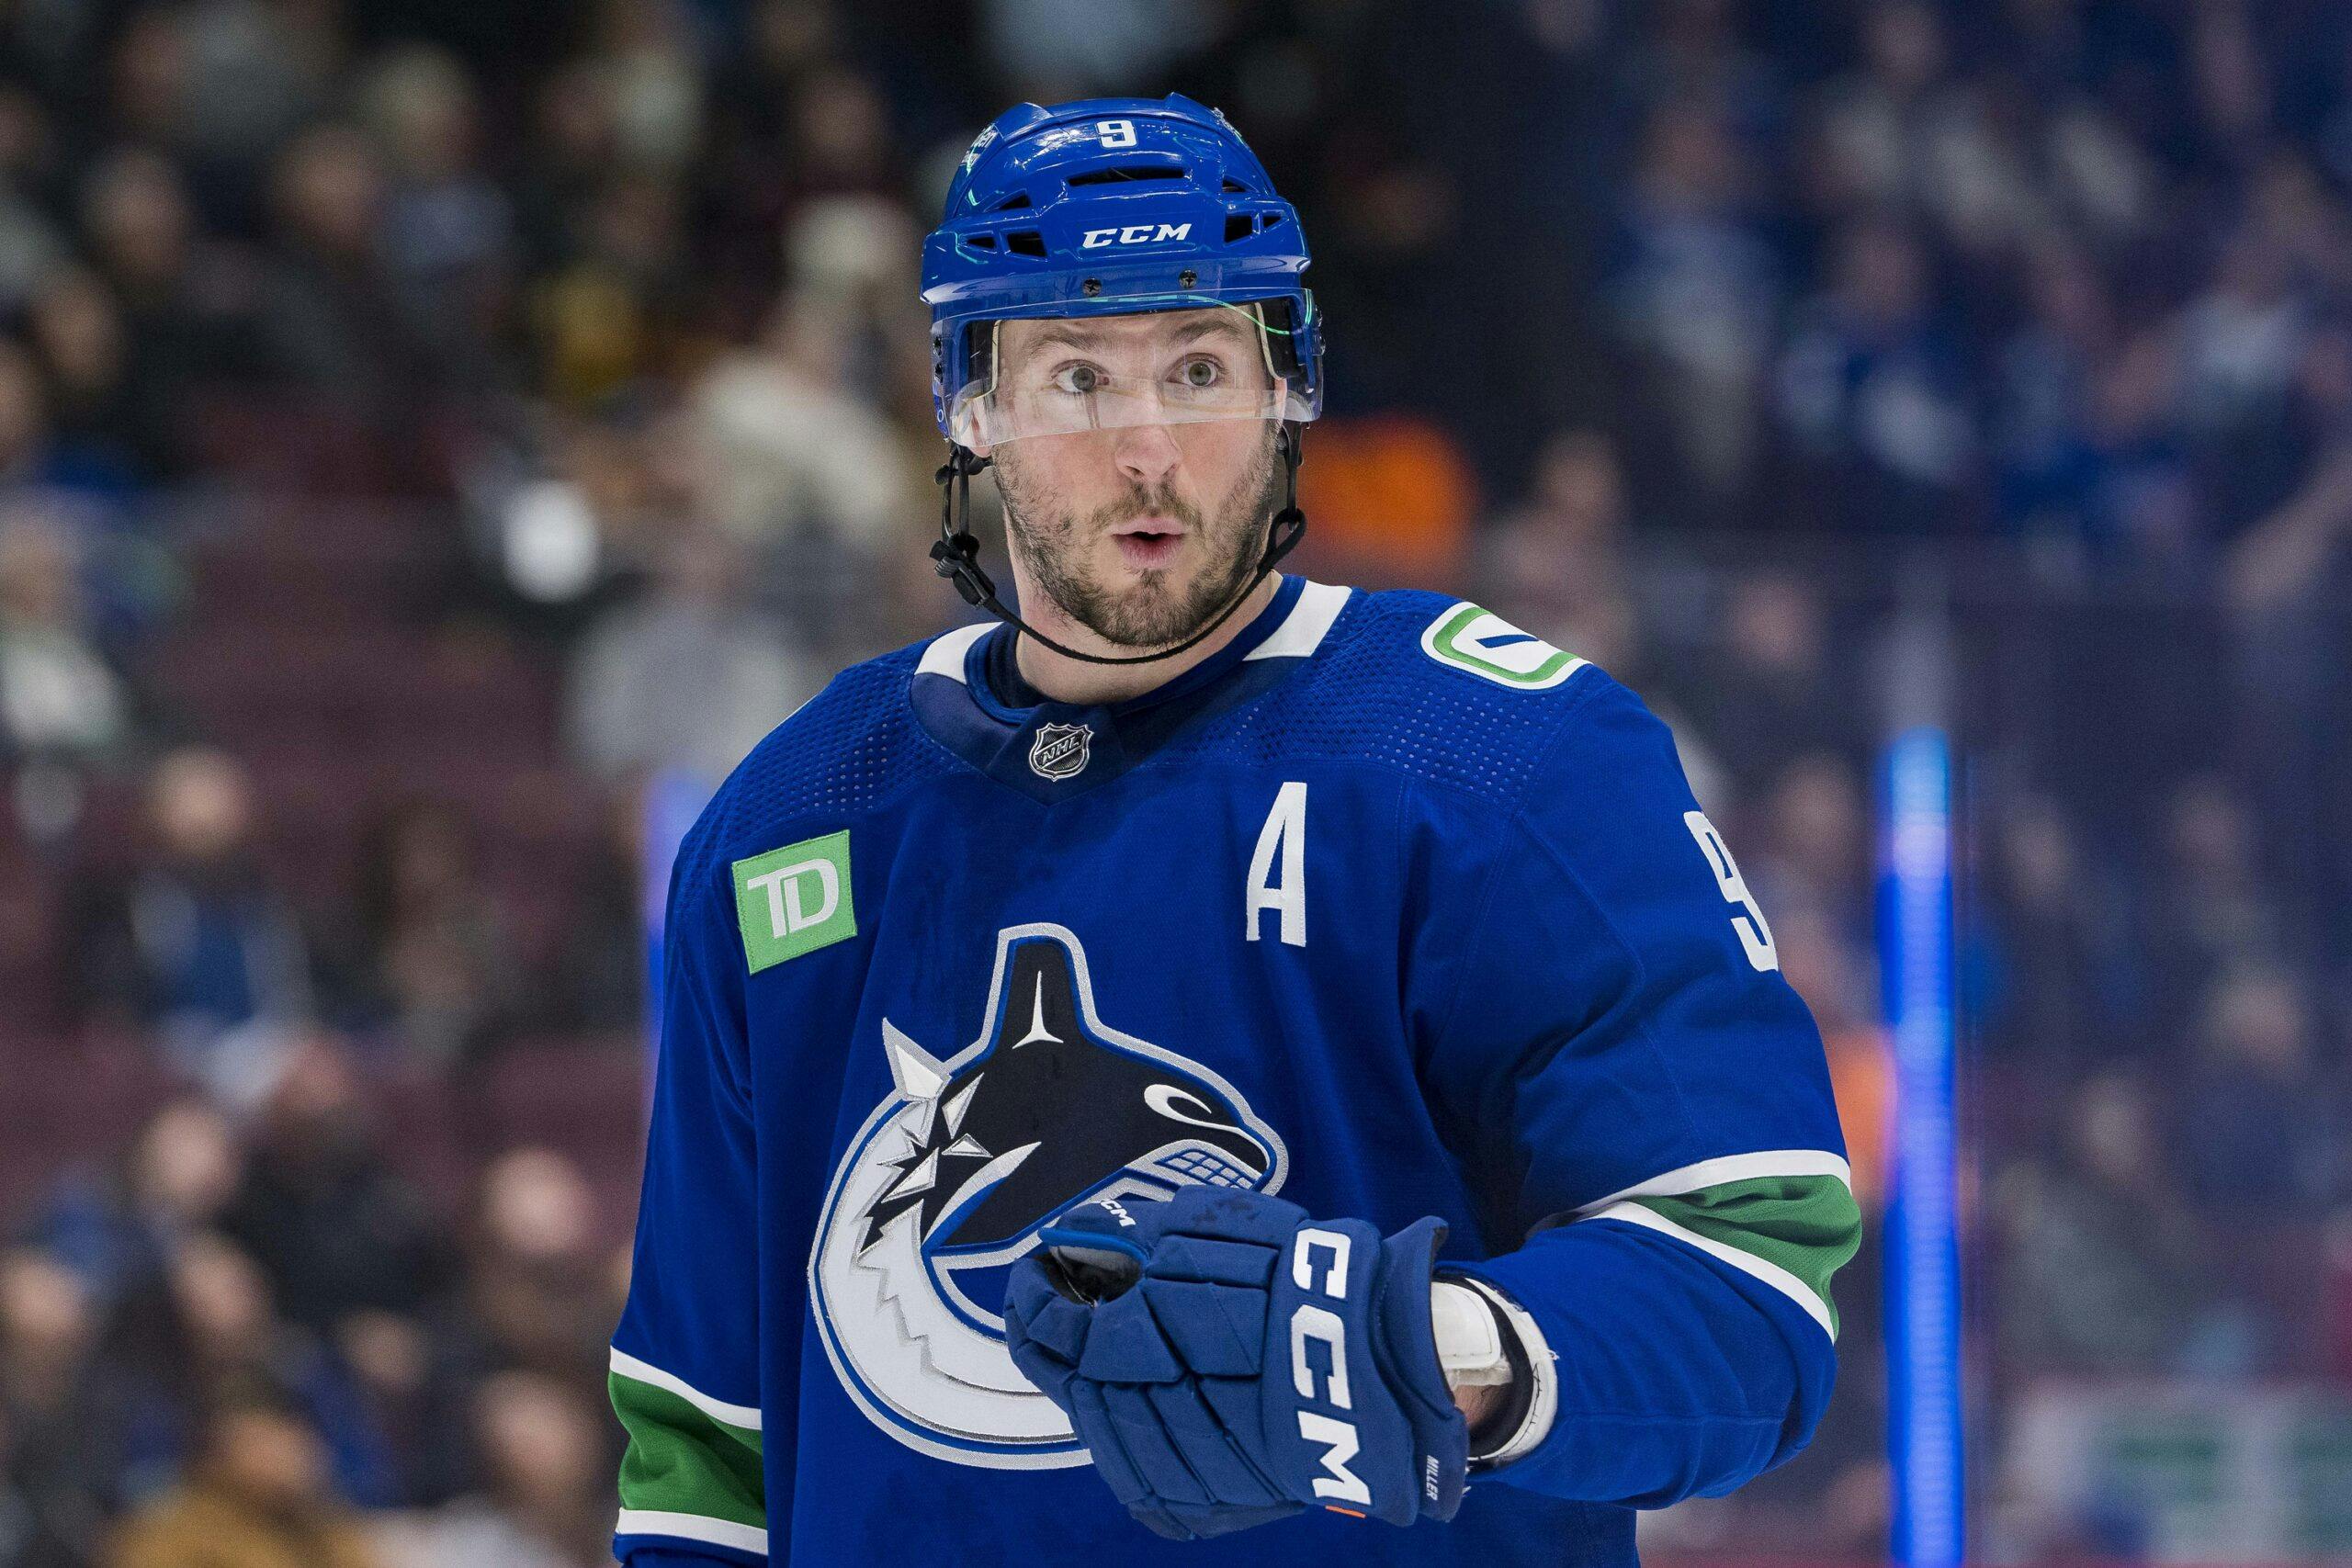 Canucks forward JT Miller is attempting to qualify for the US Open - CanucksArmy